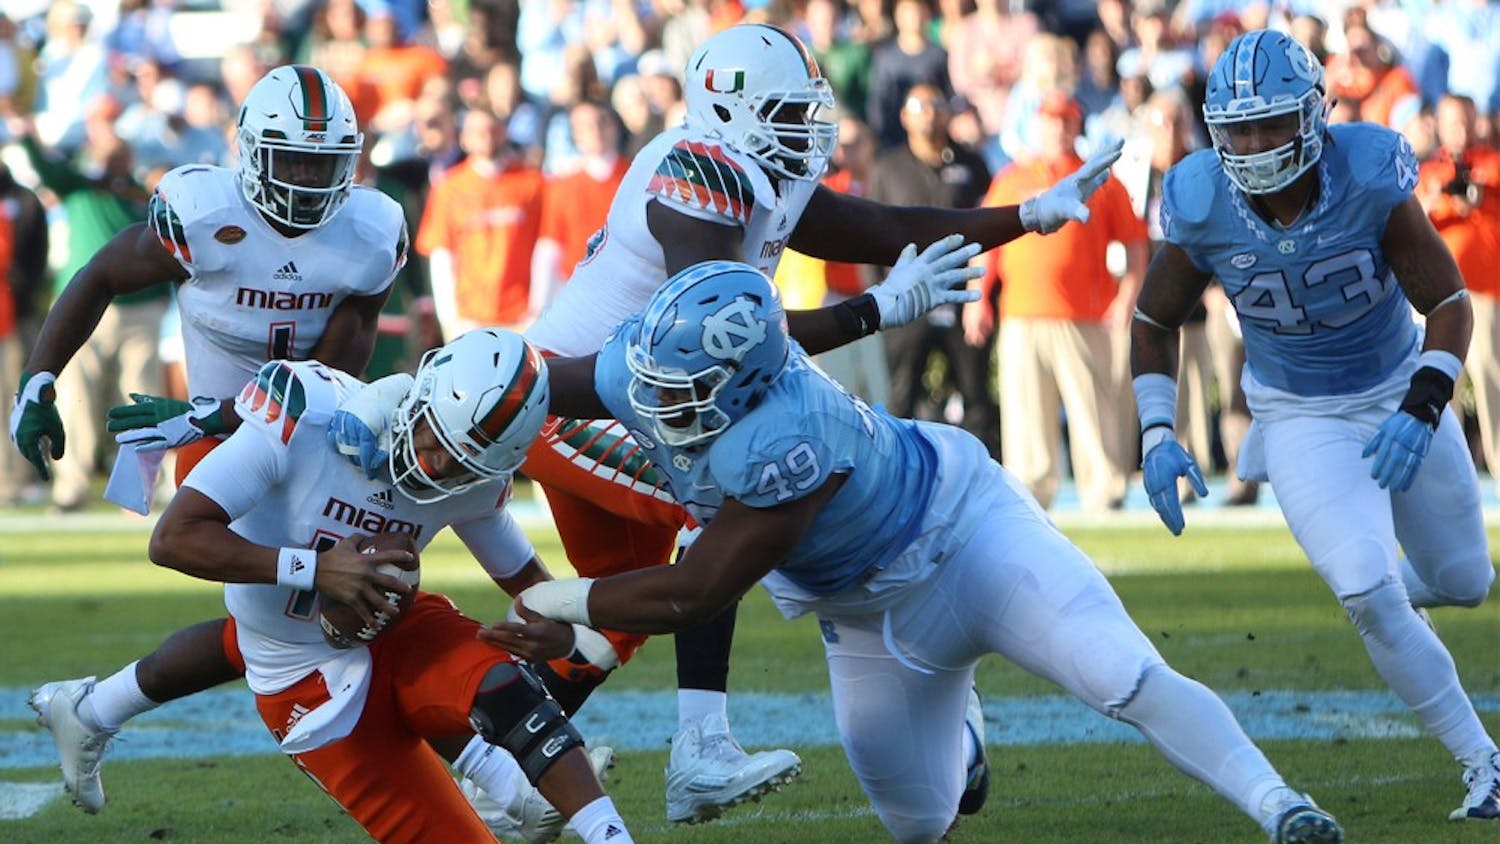 The UNC football team goes undefeated in Kenan Stadium for the 2015 season after their win against Miami on Saturday afternoon.